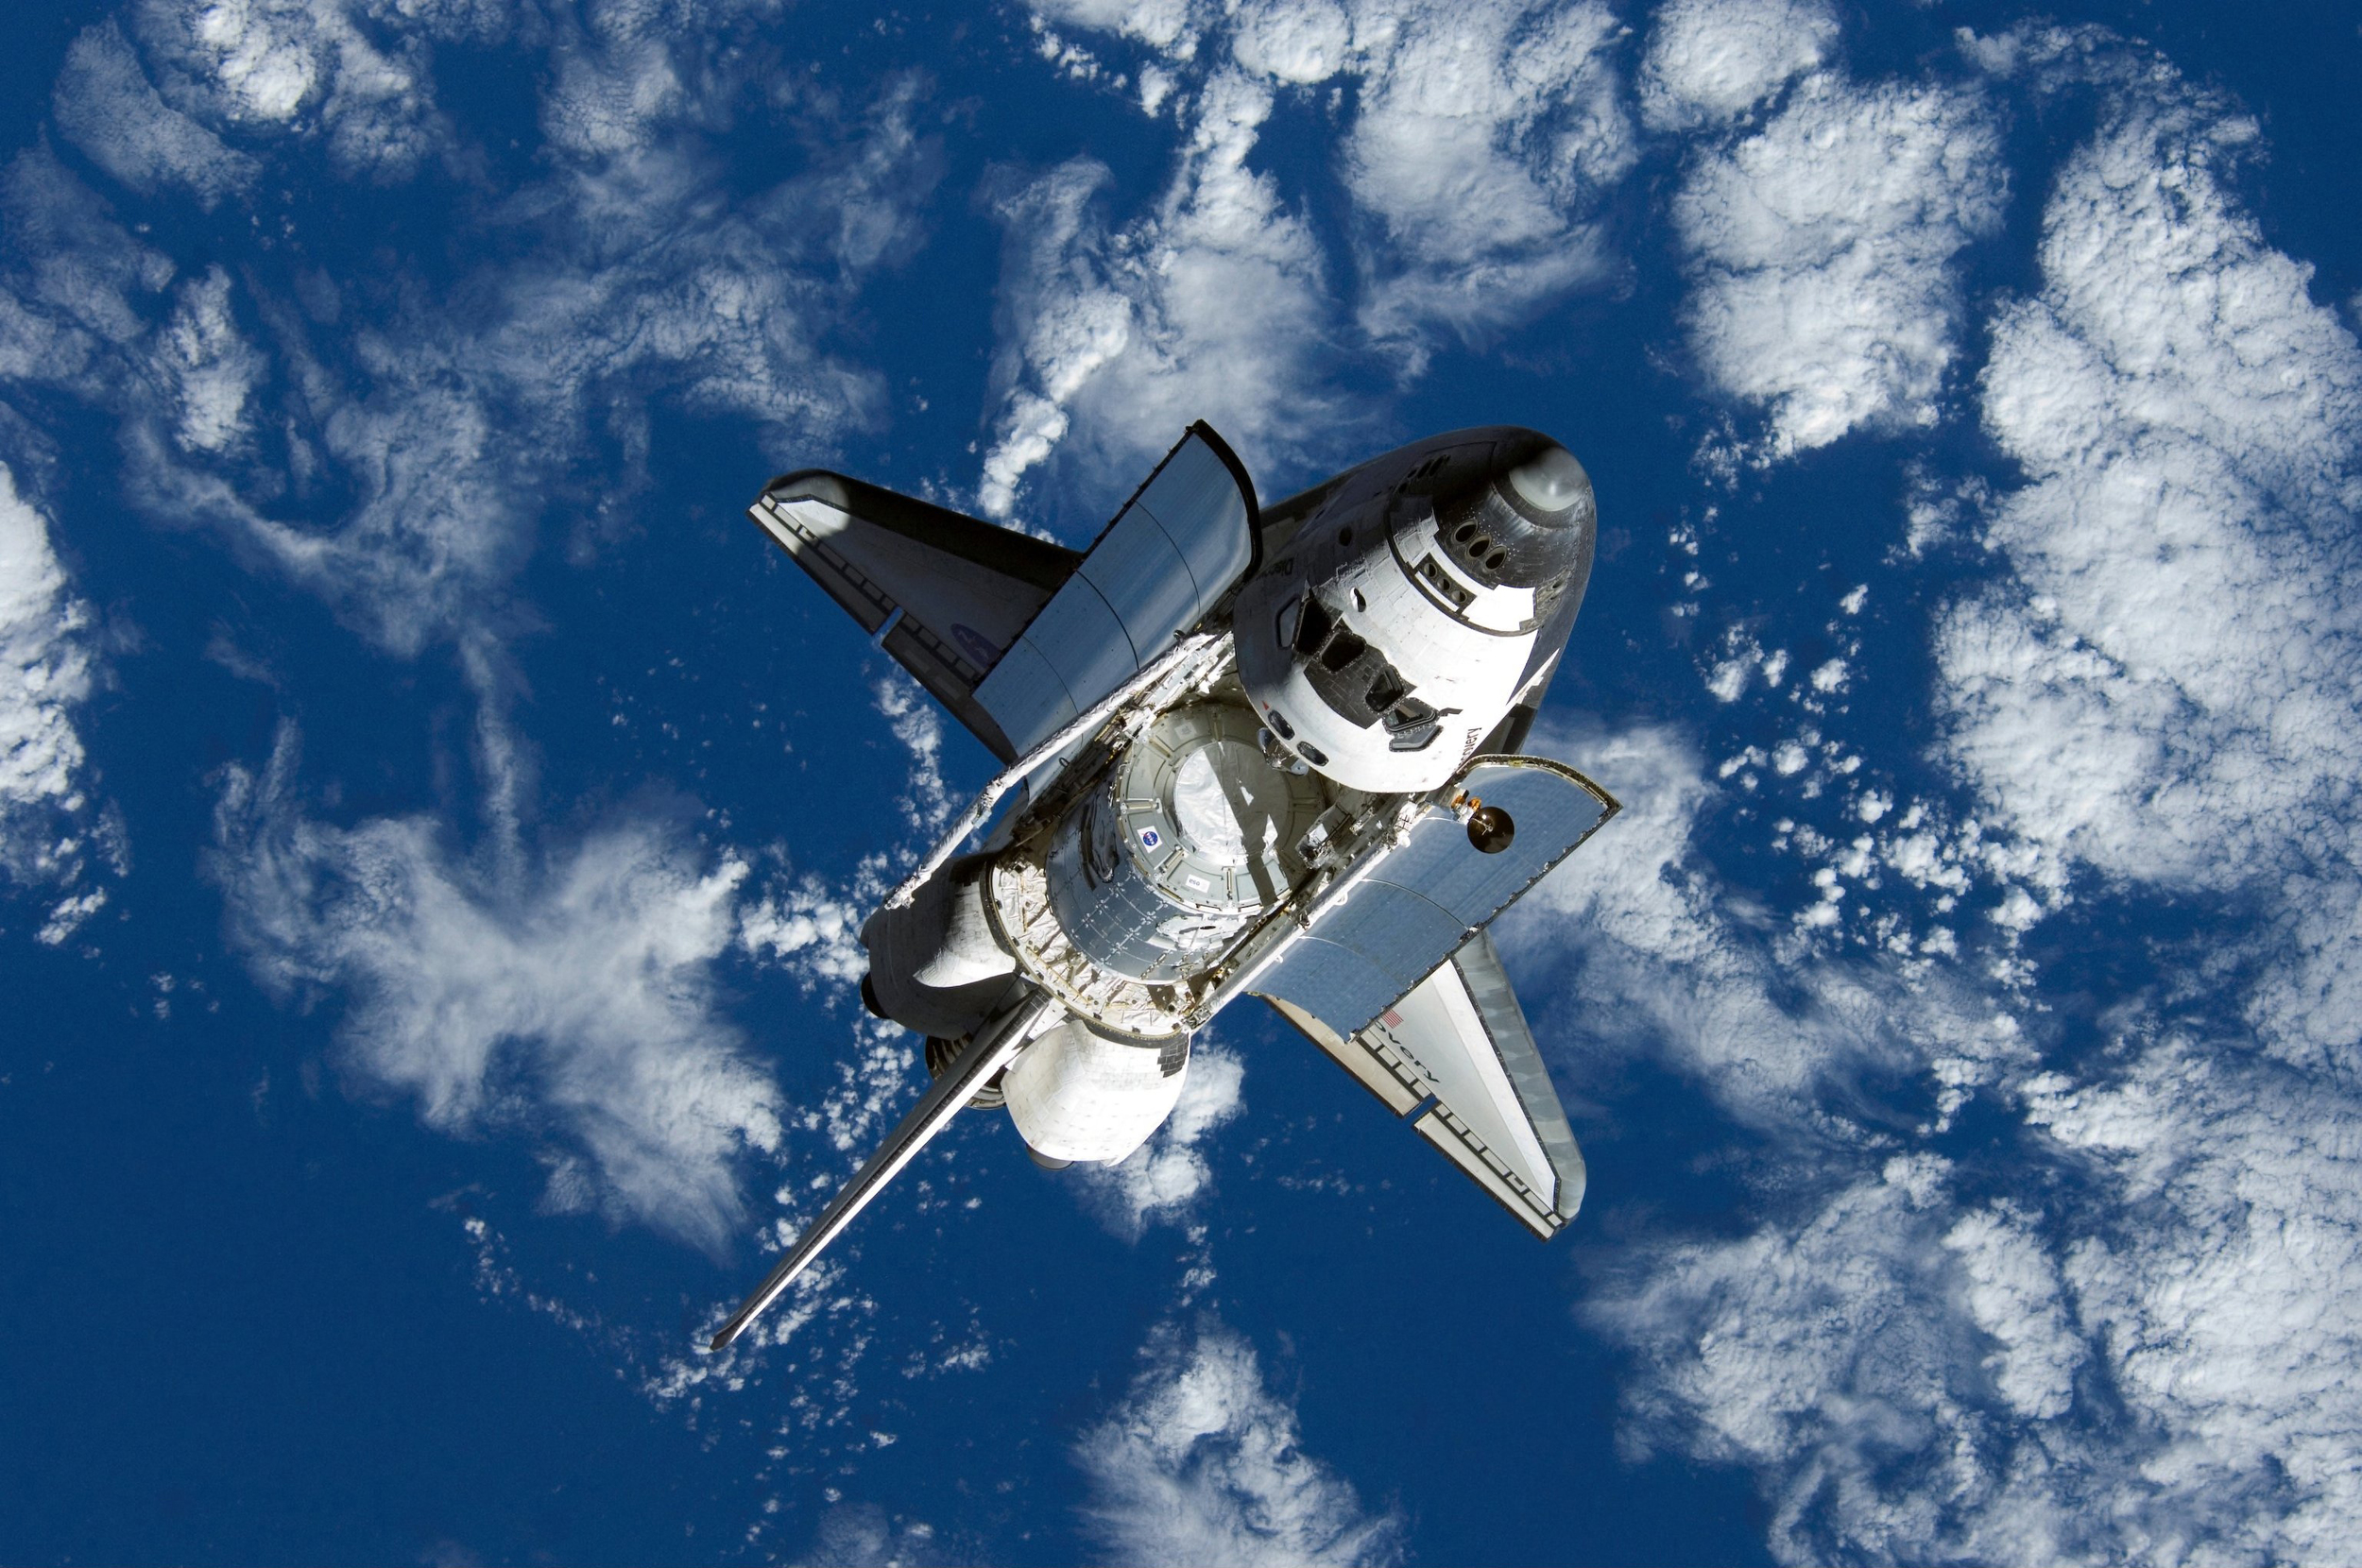  Space shuttle  Discovery  approaches the International Space Station with the  Harmony  Module in its payload bay. Photo Credit: NASA 